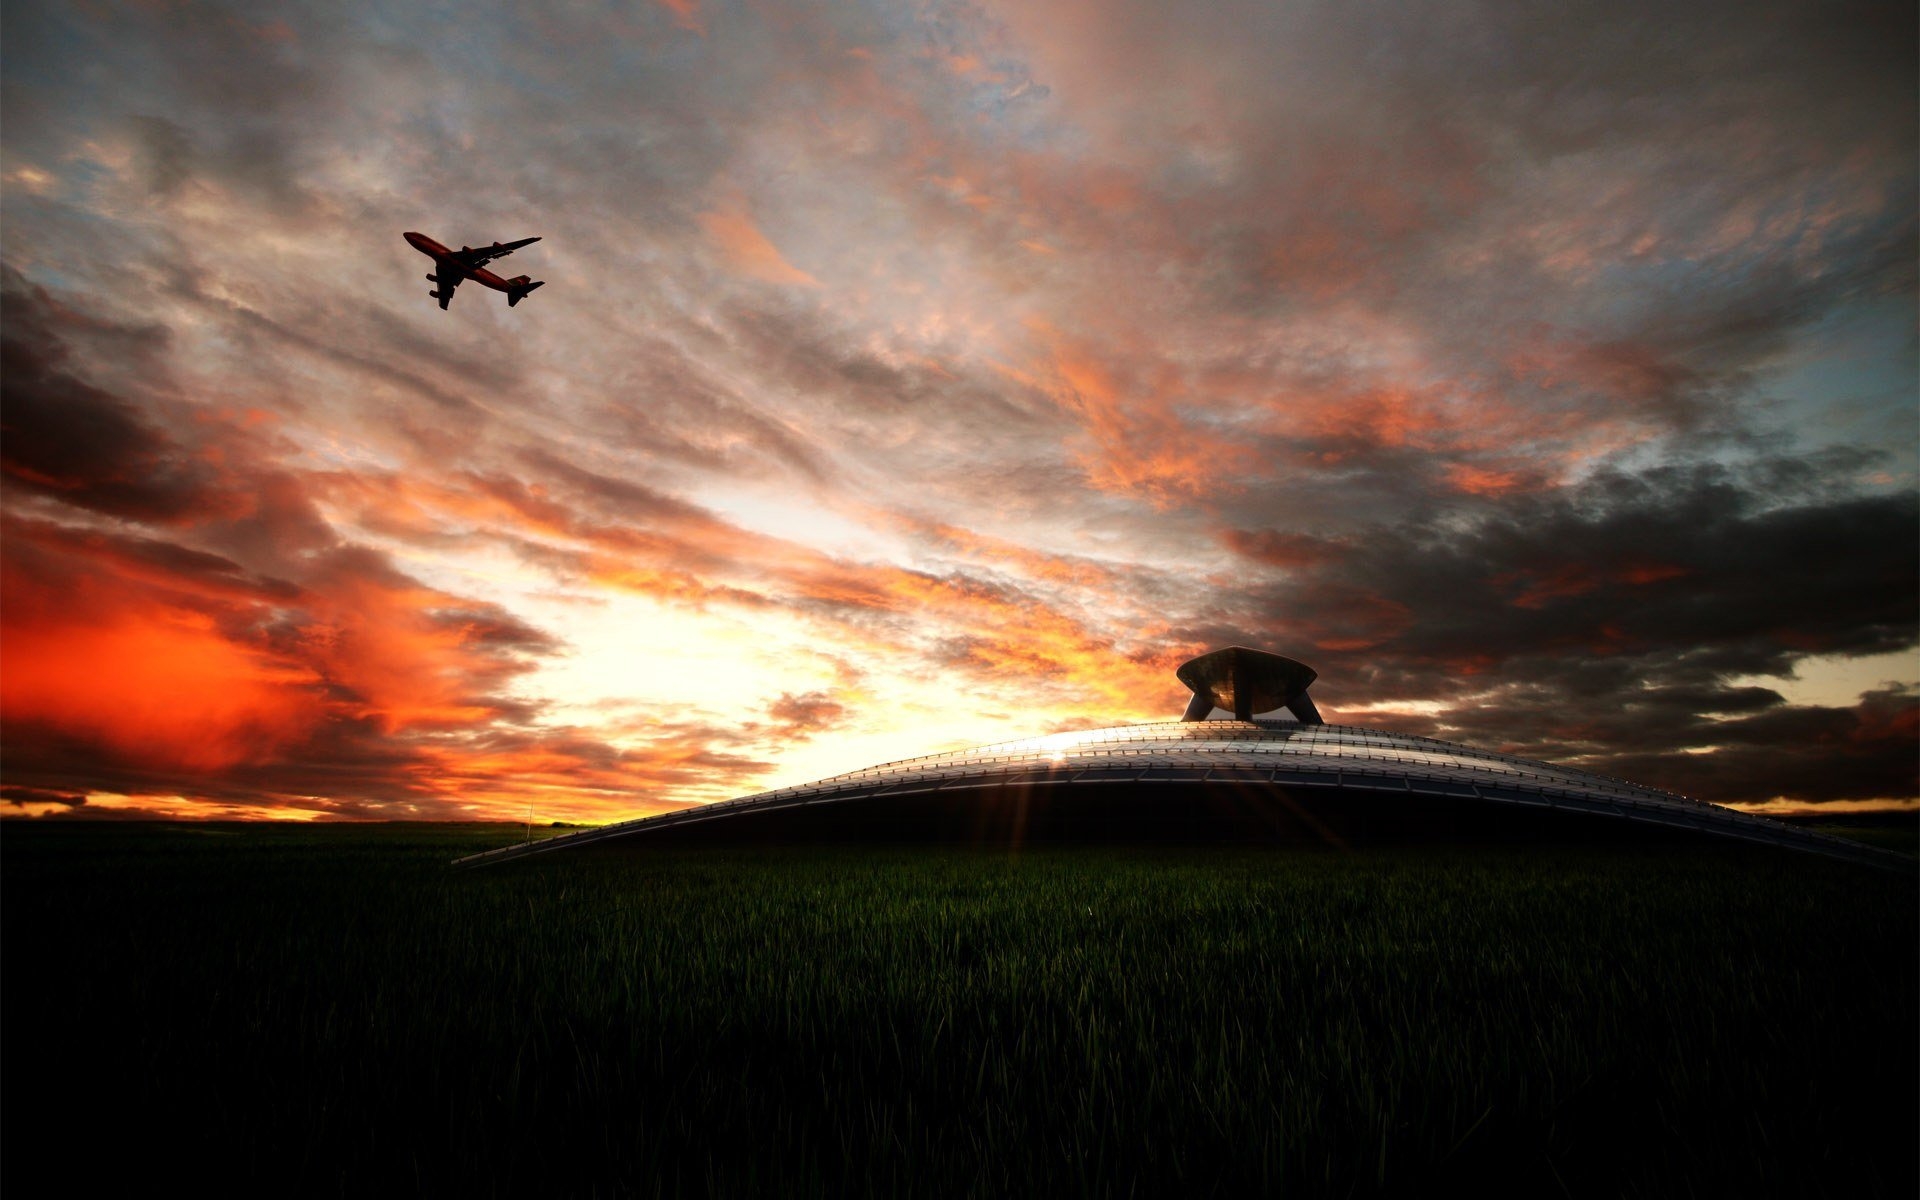 Passenger Plane In The Sky Wallpaper And Image